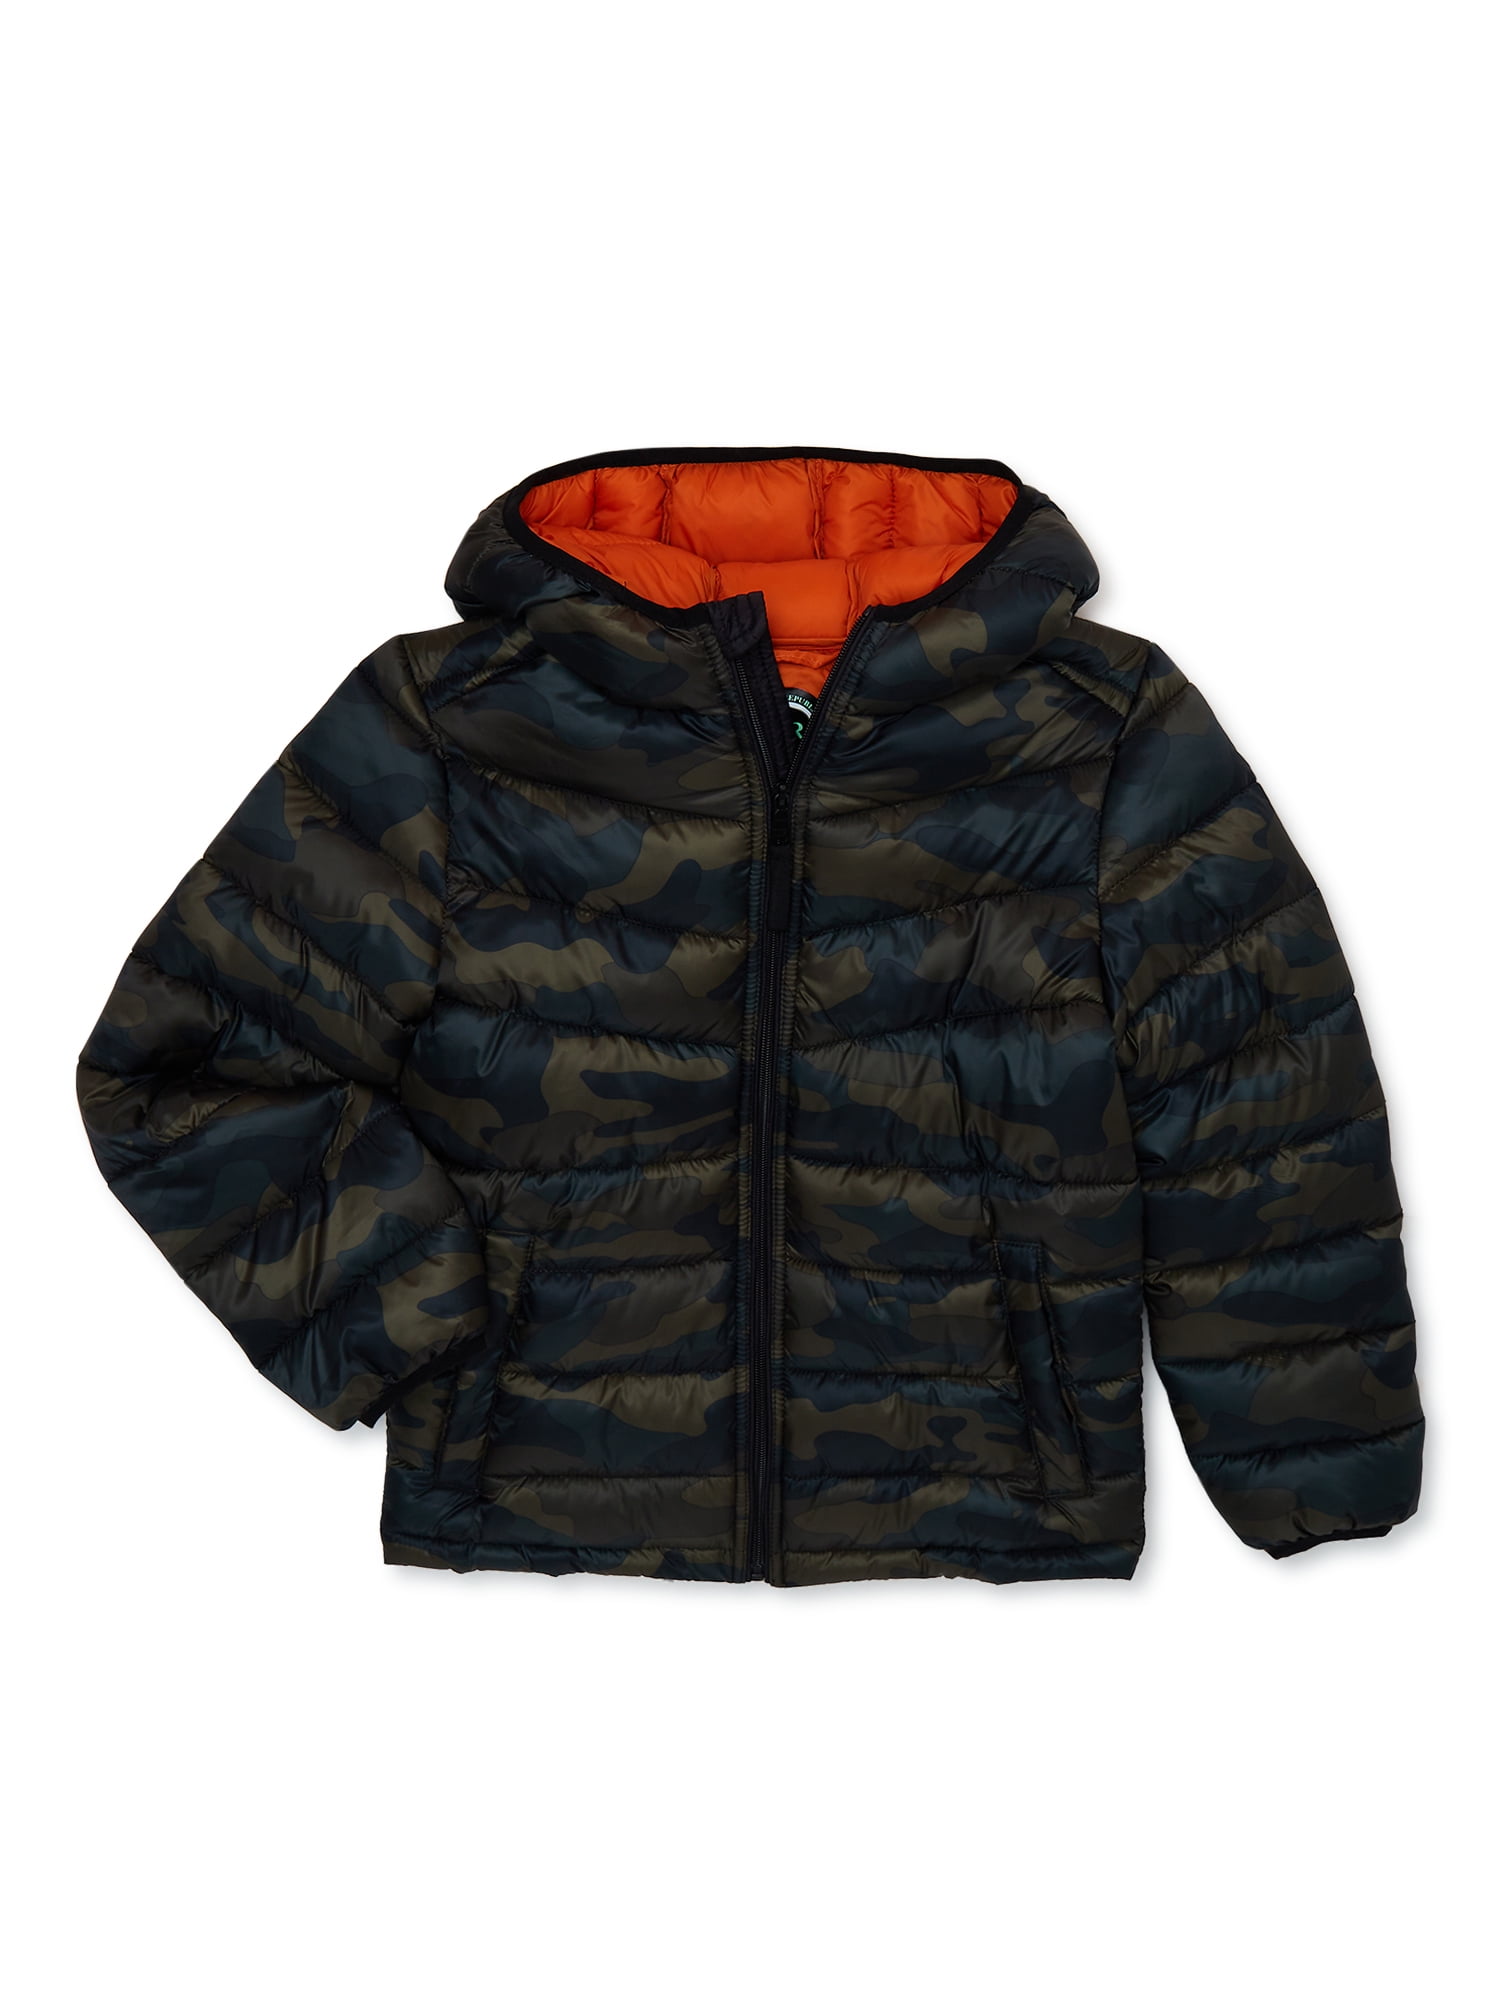 Urban Republic Boys Packable Puffer Jacket with Hood, Sizes 5-20 ...